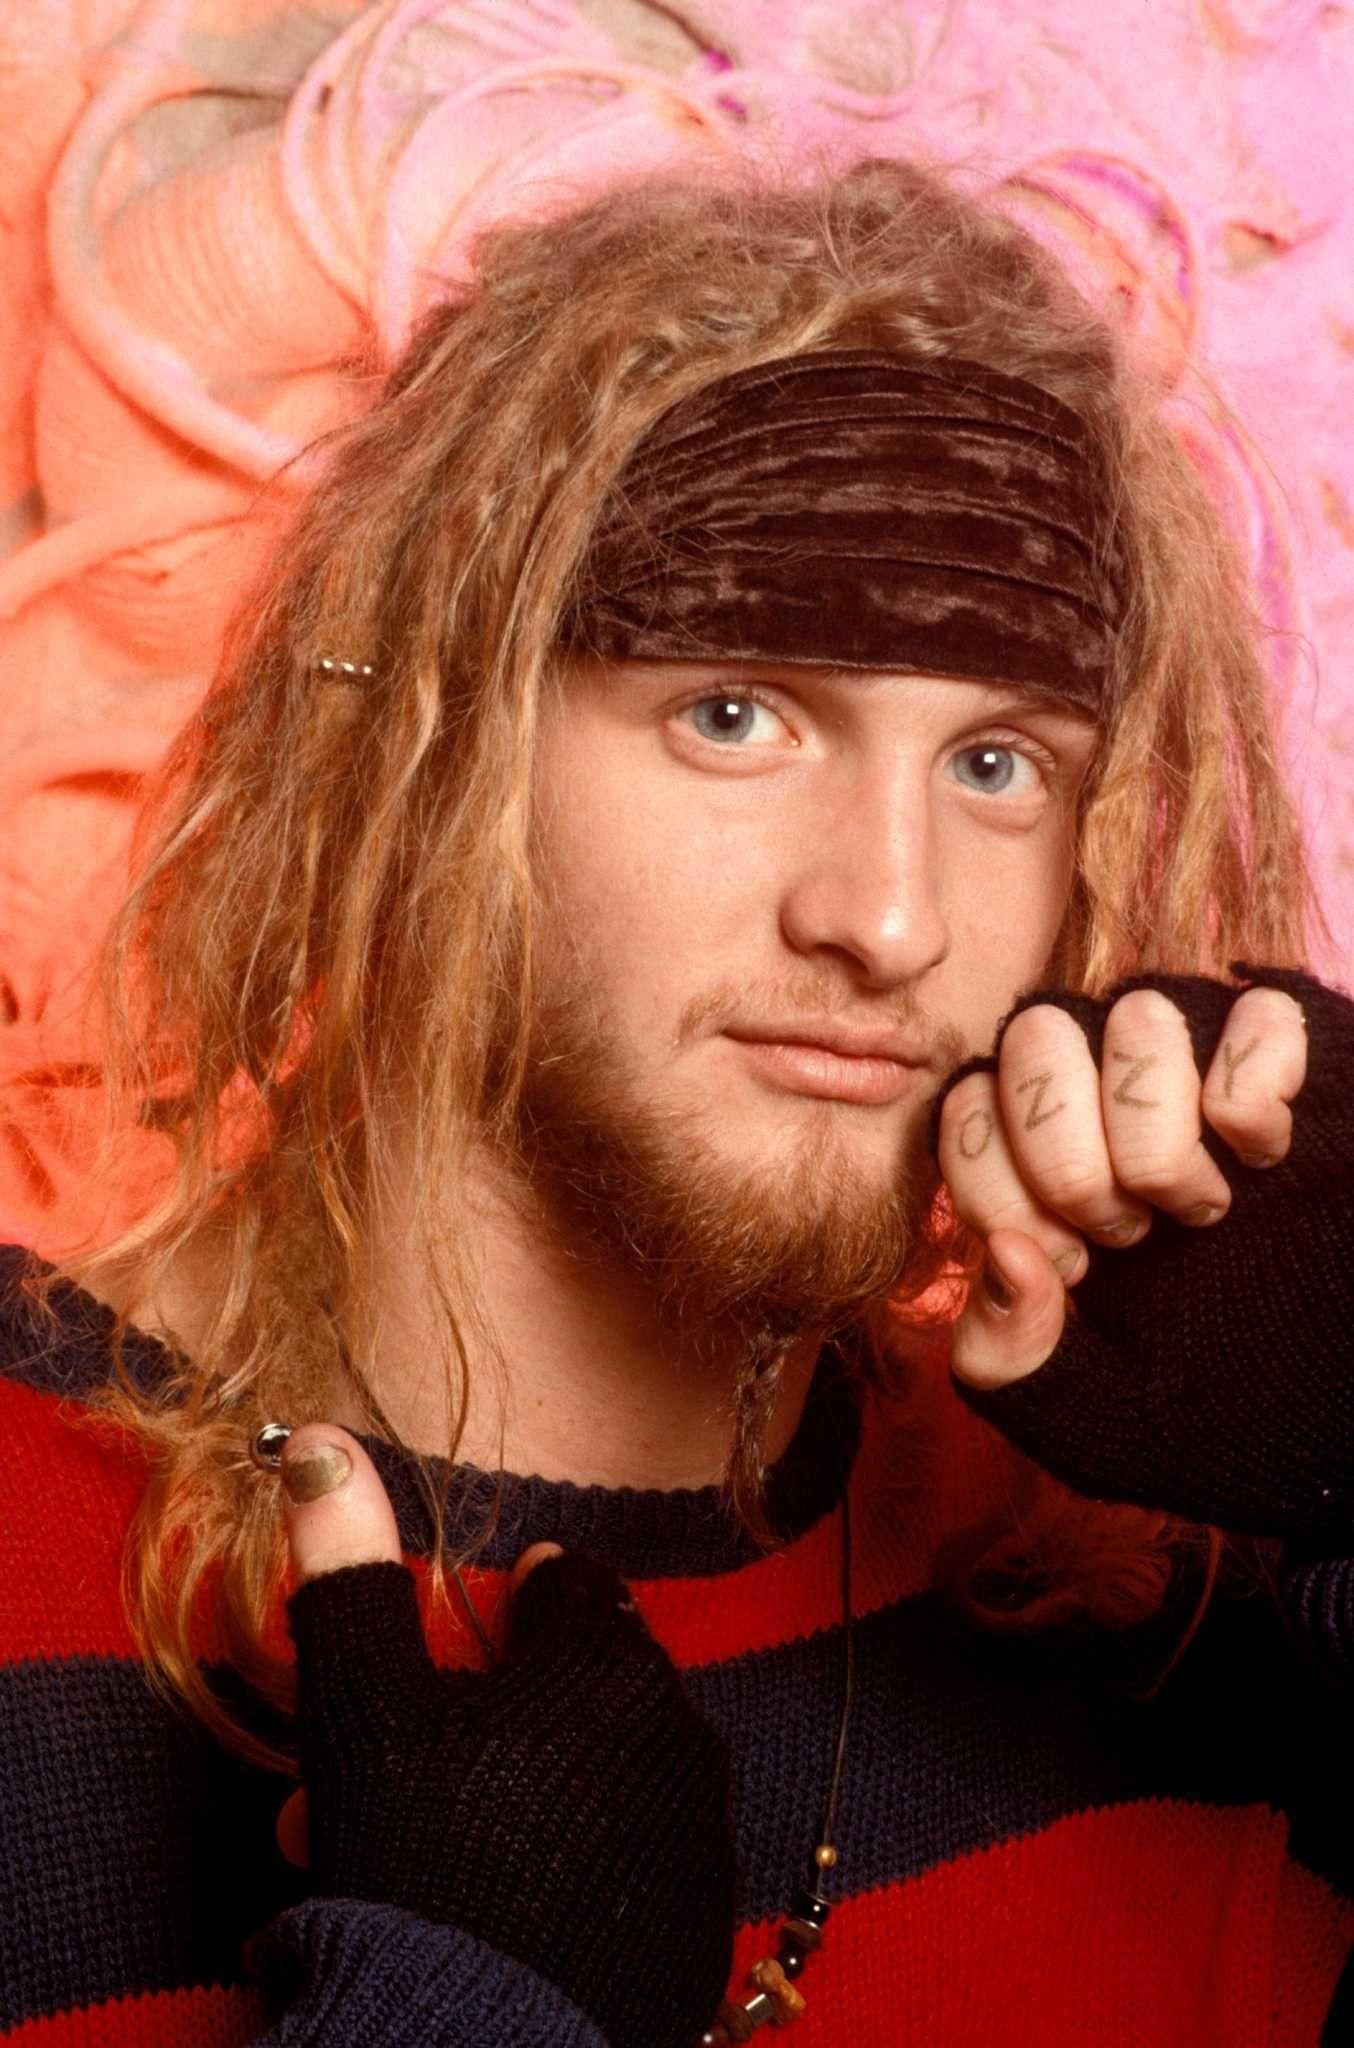 Layne Staley Wallpapers - Top Free Layne Staley Backgrounds ...